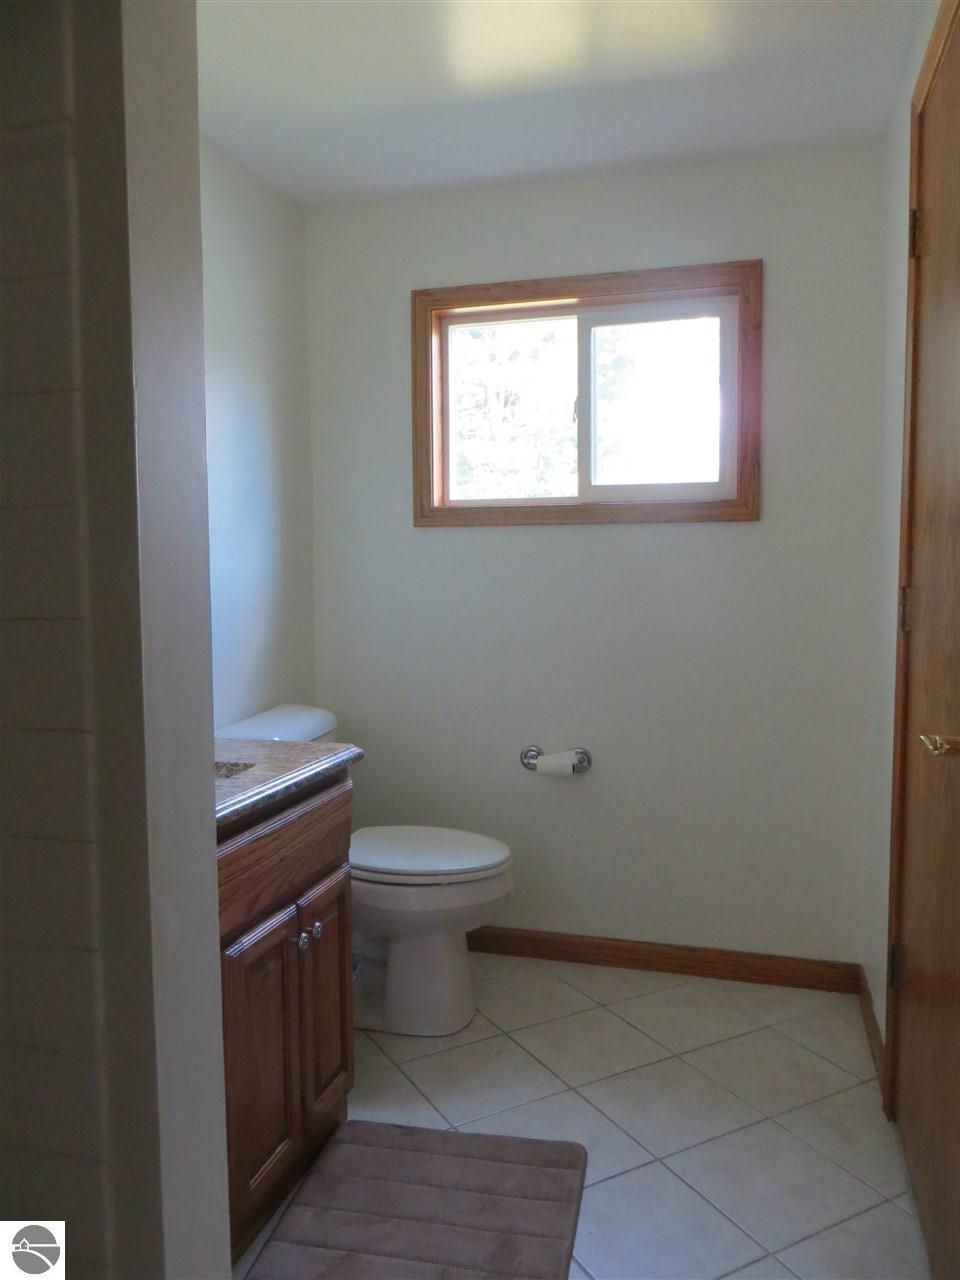 450 Old State Road, East Tawas, MI 48730 photo 22 of 68